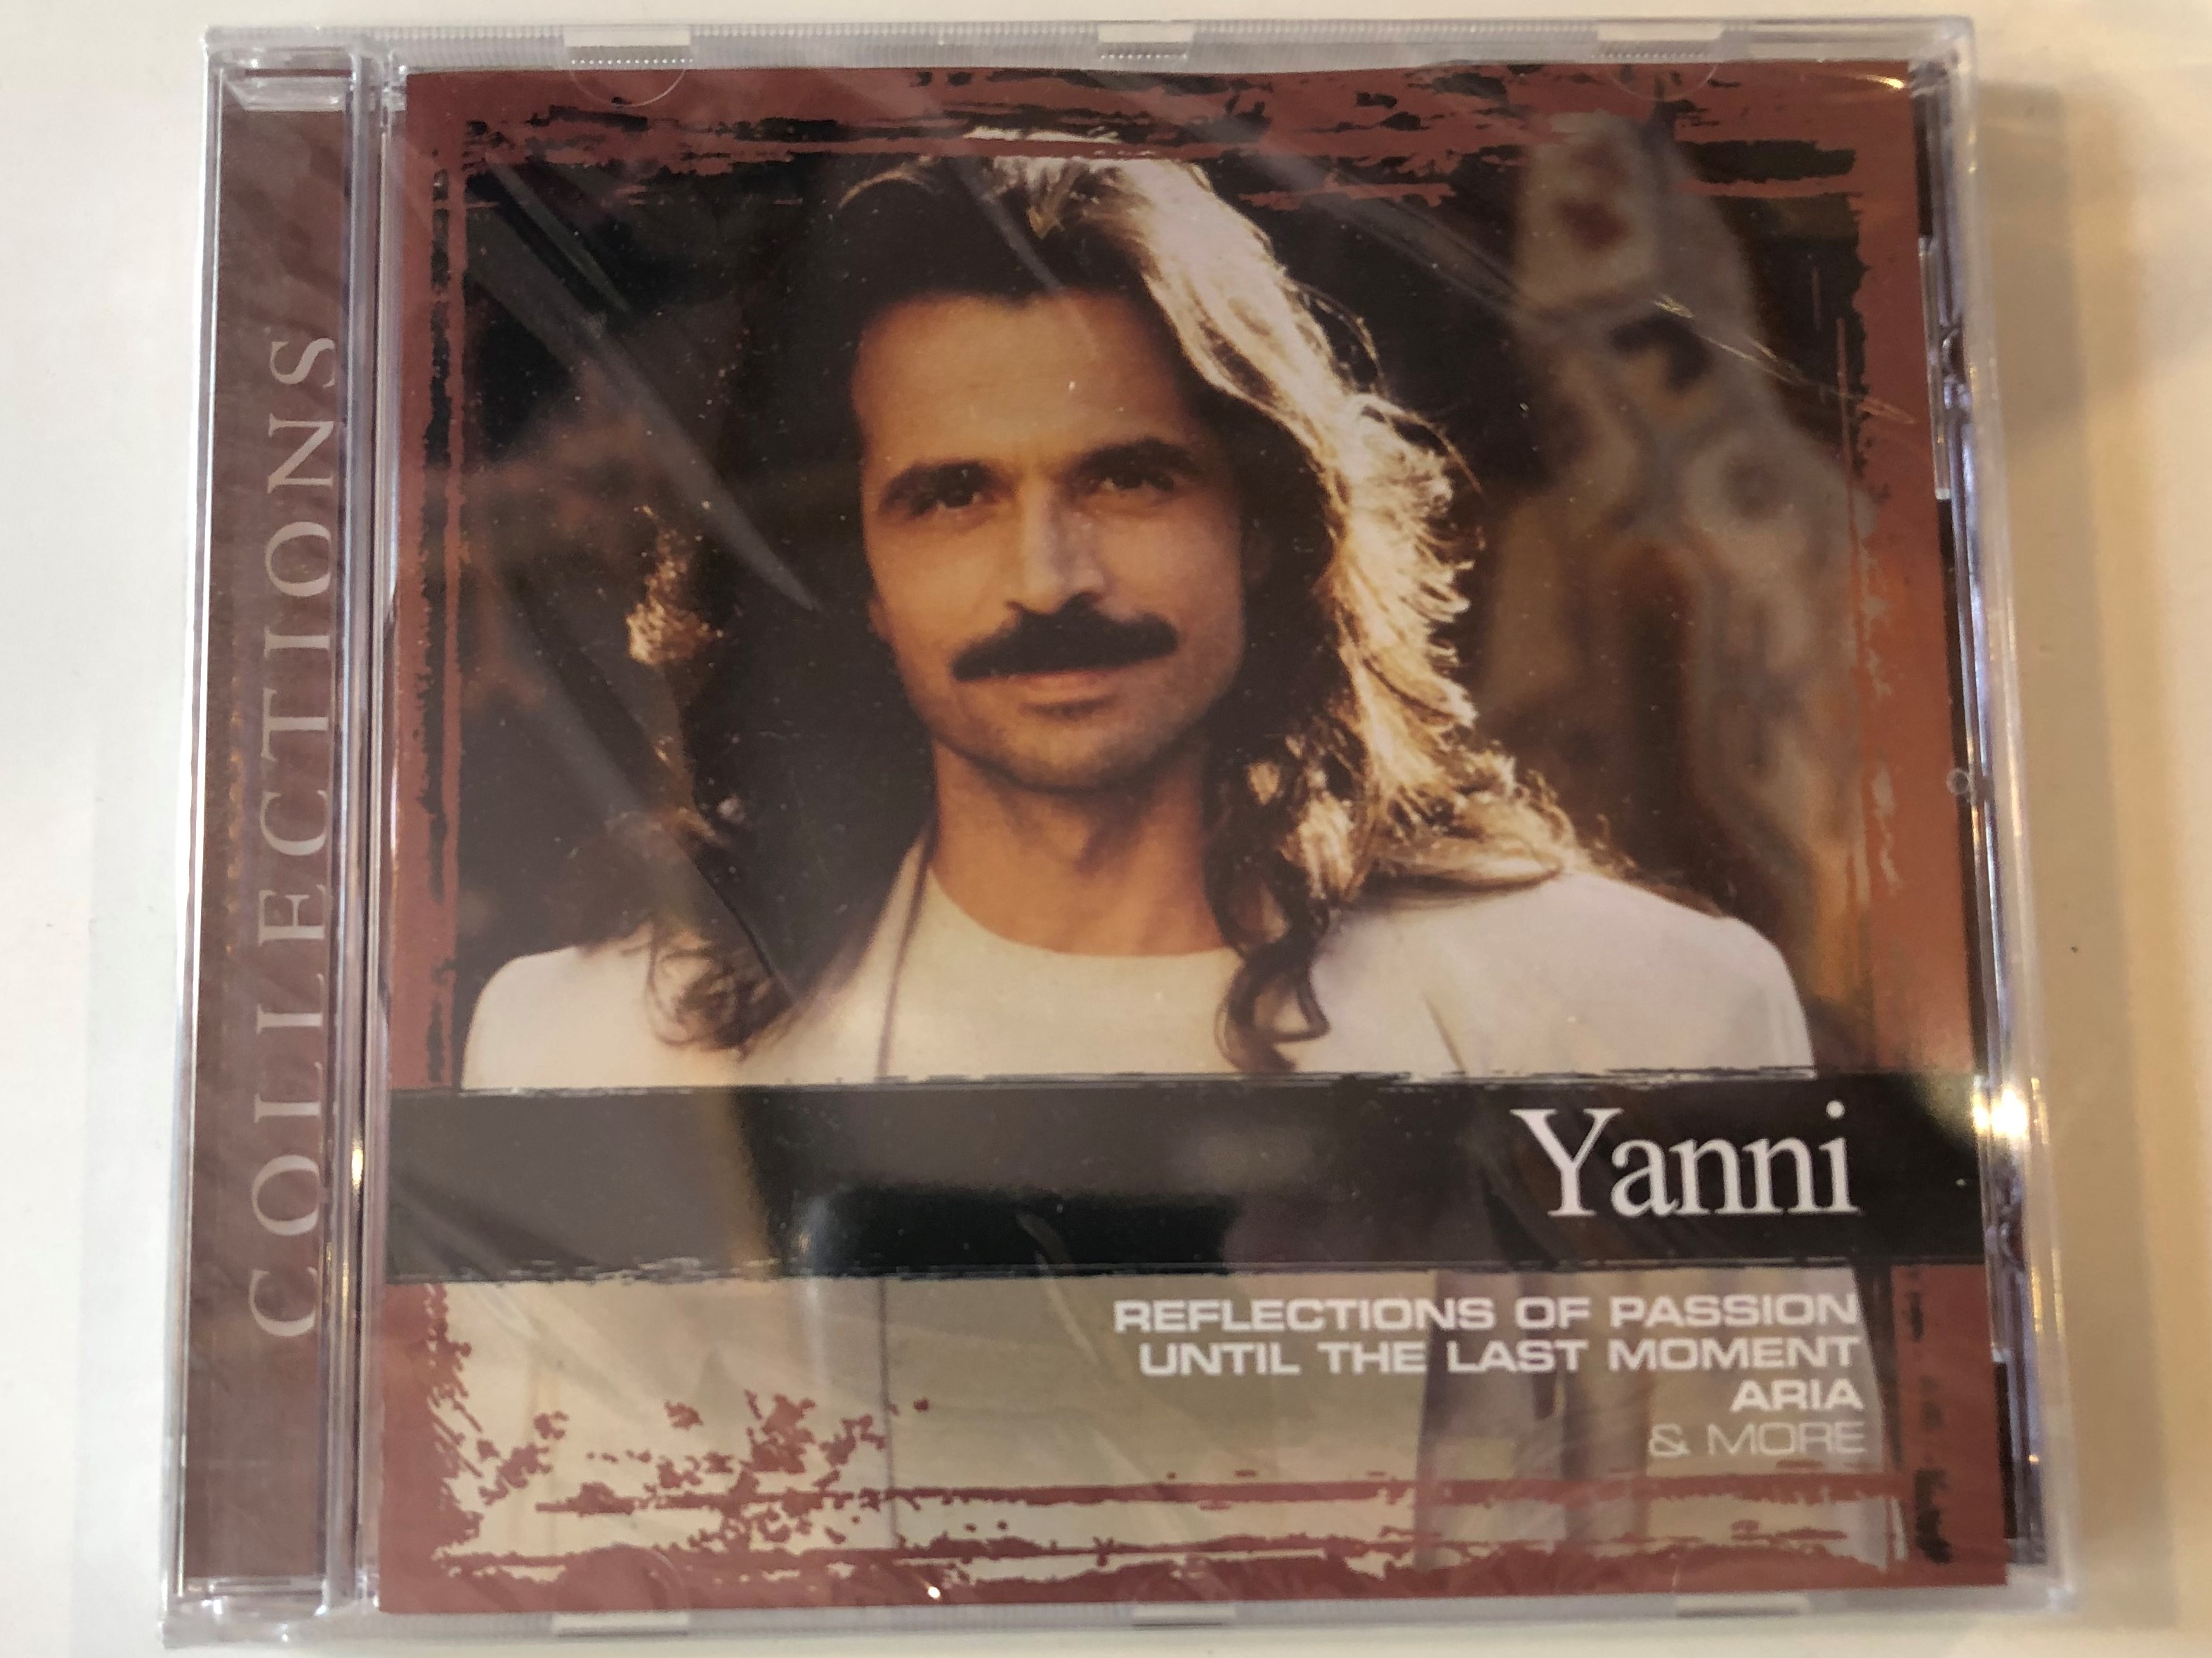 yanni-collections-reflections-of-passion-until-the-last-moment-aria-more-sony-bmg-music-entertainment-audio-cd-2008-88697252752-1-.jpg